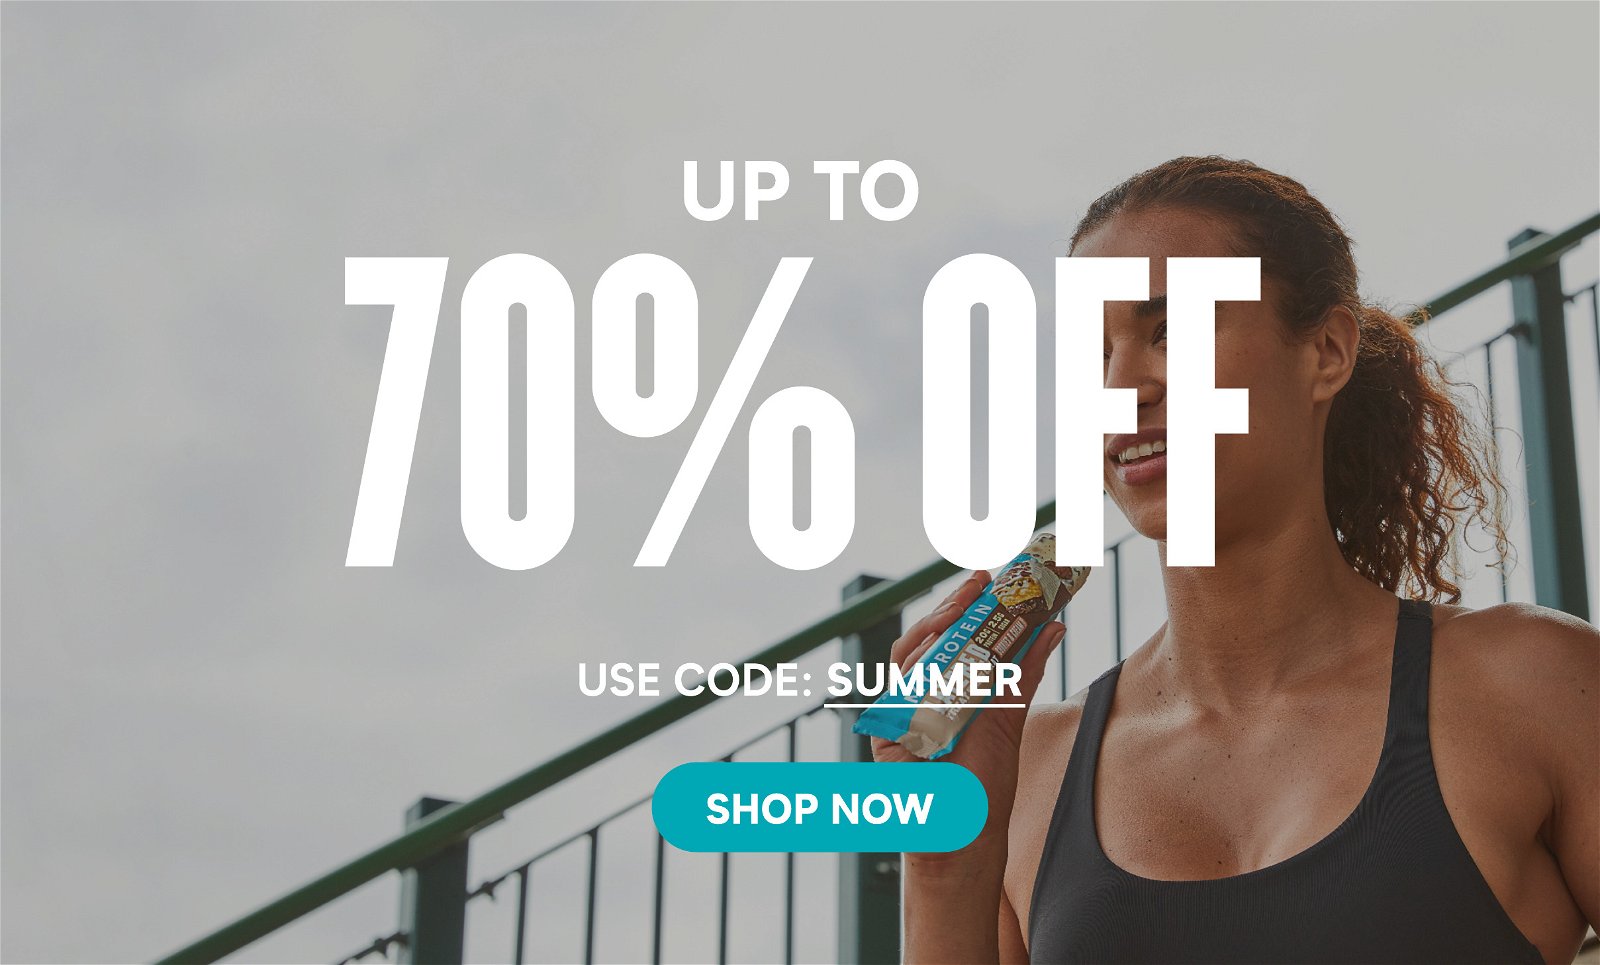 Up to 70% off this summer!